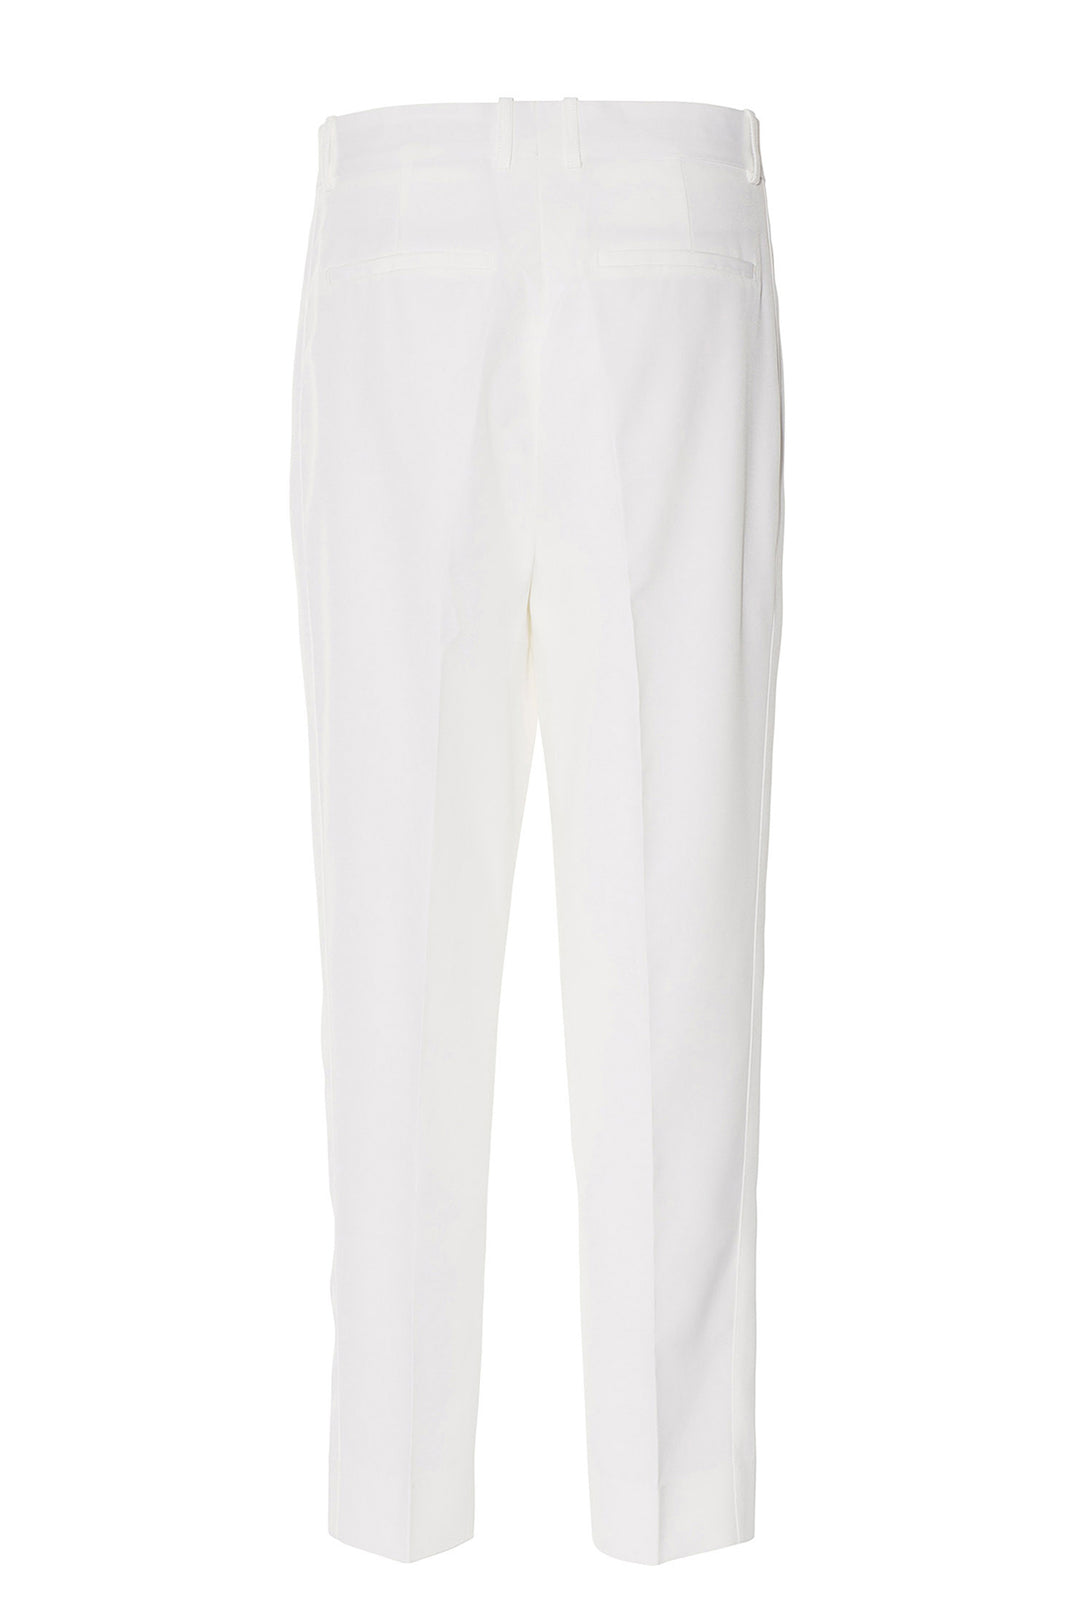 Heartmade Noel pants HM TROUSERS 104 Off White